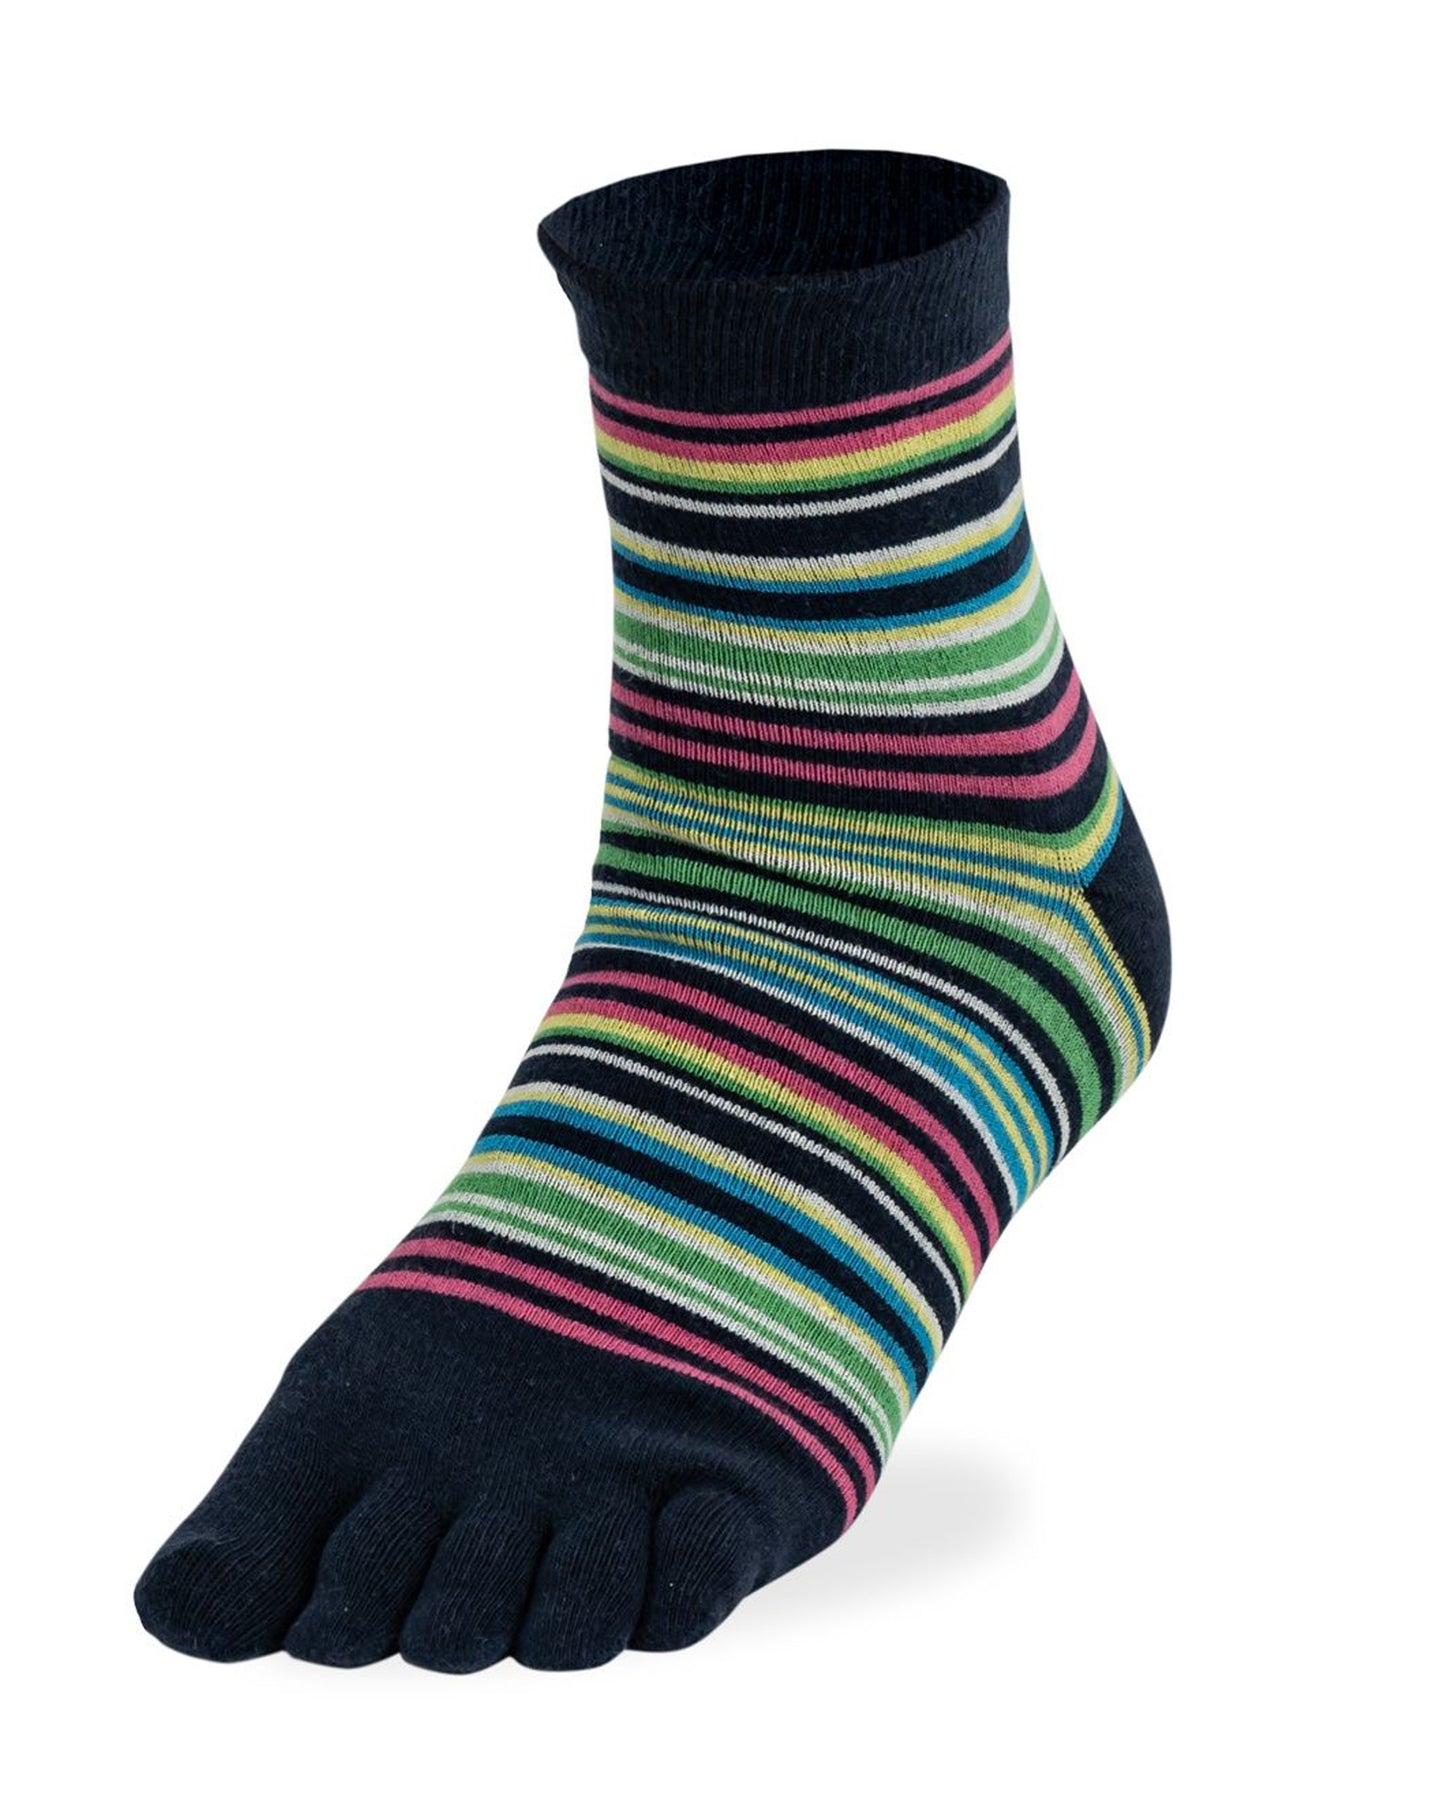 Bonnie Doon Toe Sock Funky Stripes - Navy, pink, blue and lime green horizontal striped crew length cotton mix toe socks.